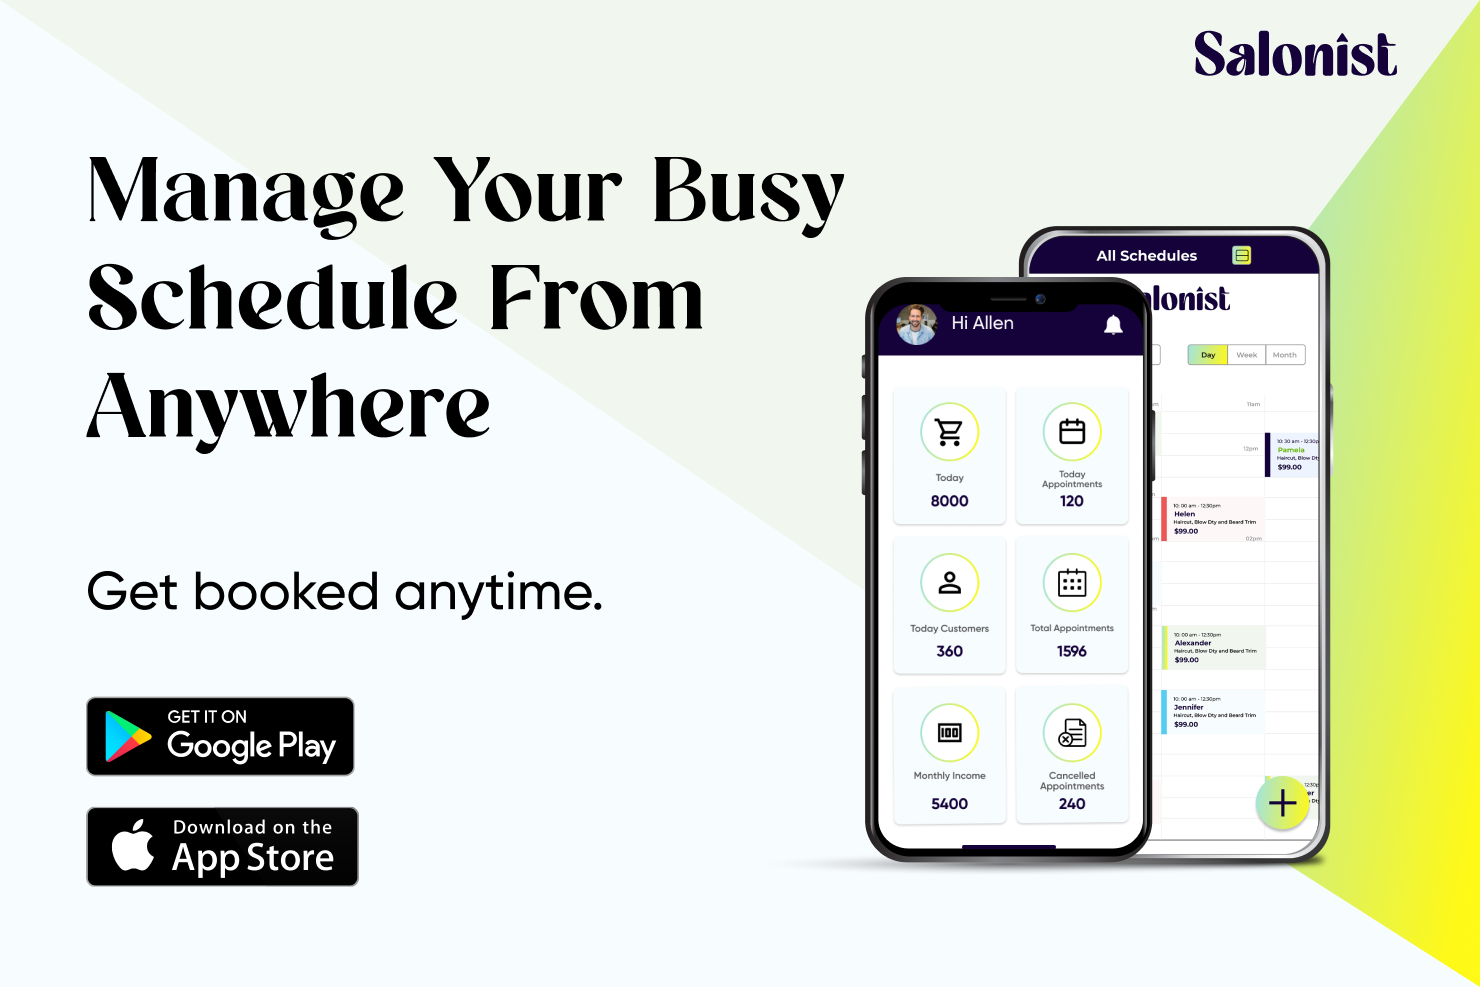 Manage your busy schedules